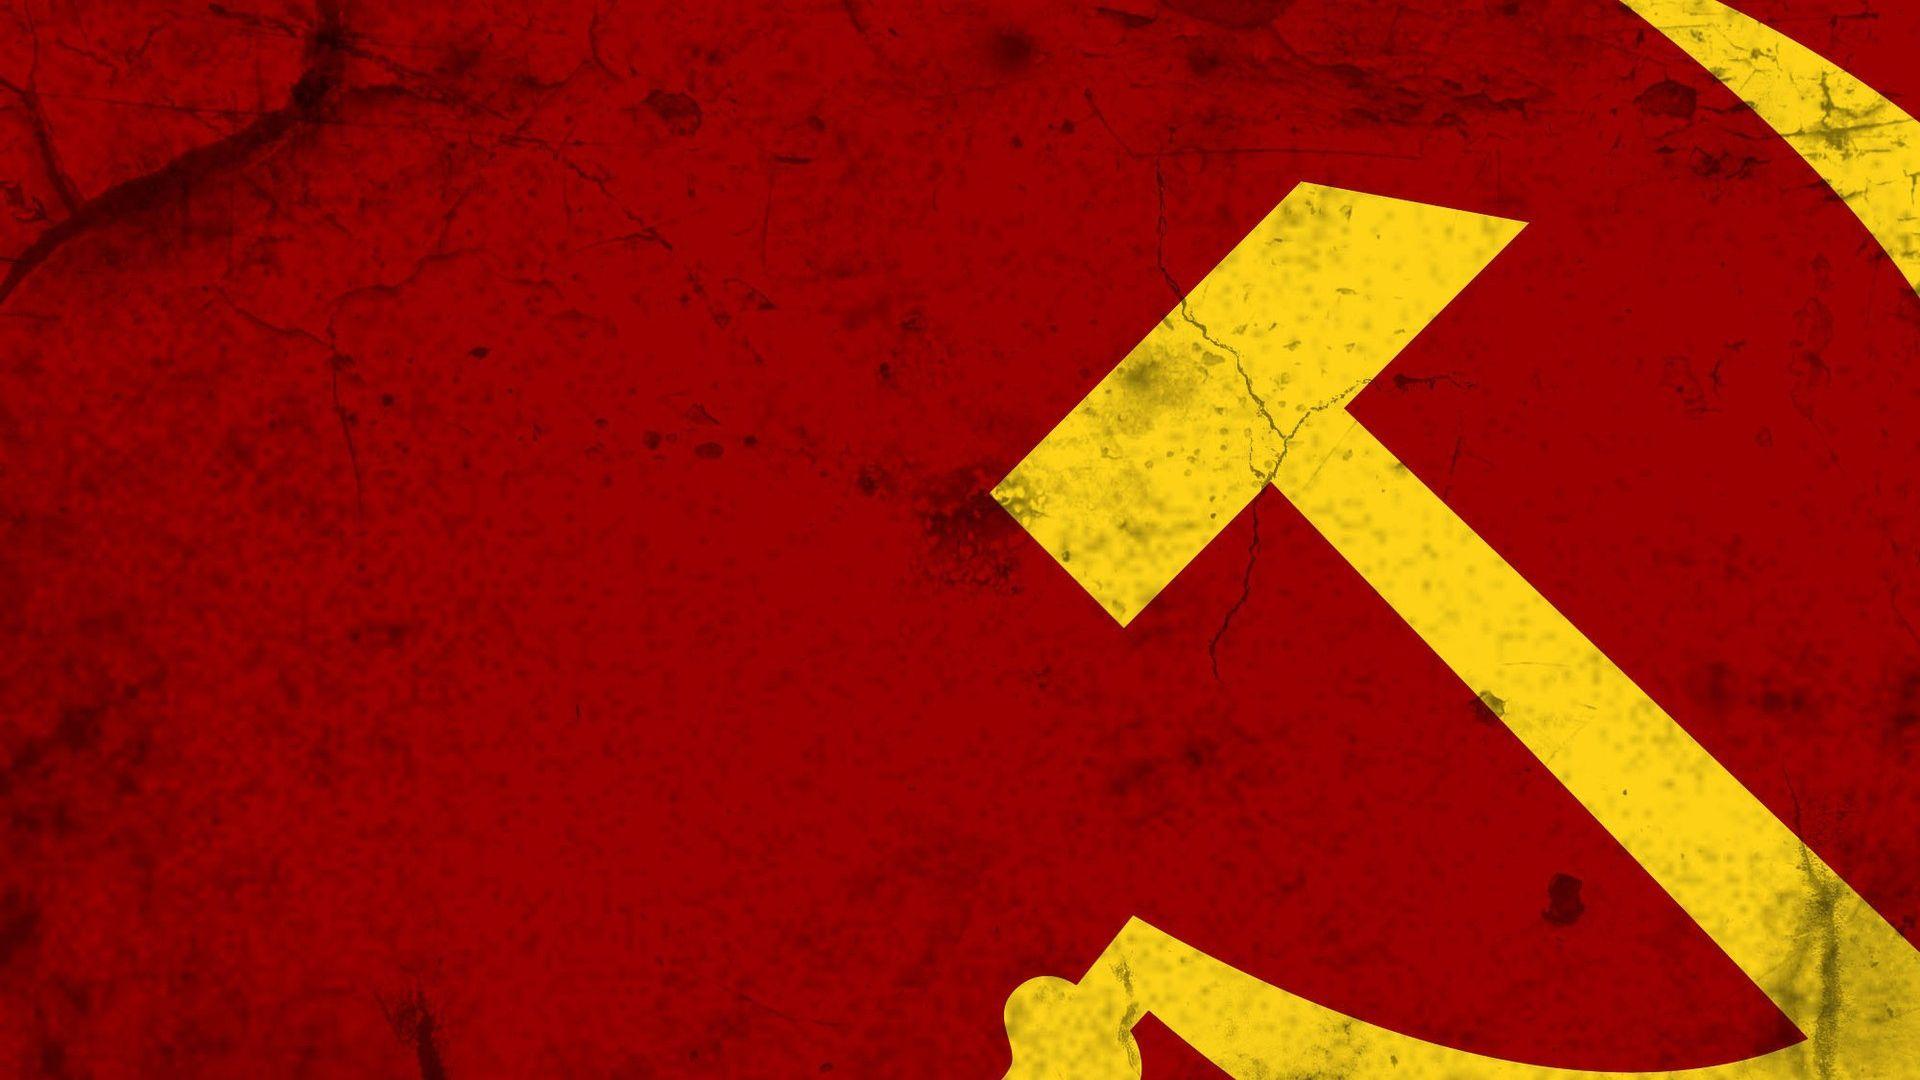 Download Wallpaper 1920x1080 hammer and sickle, soviet union